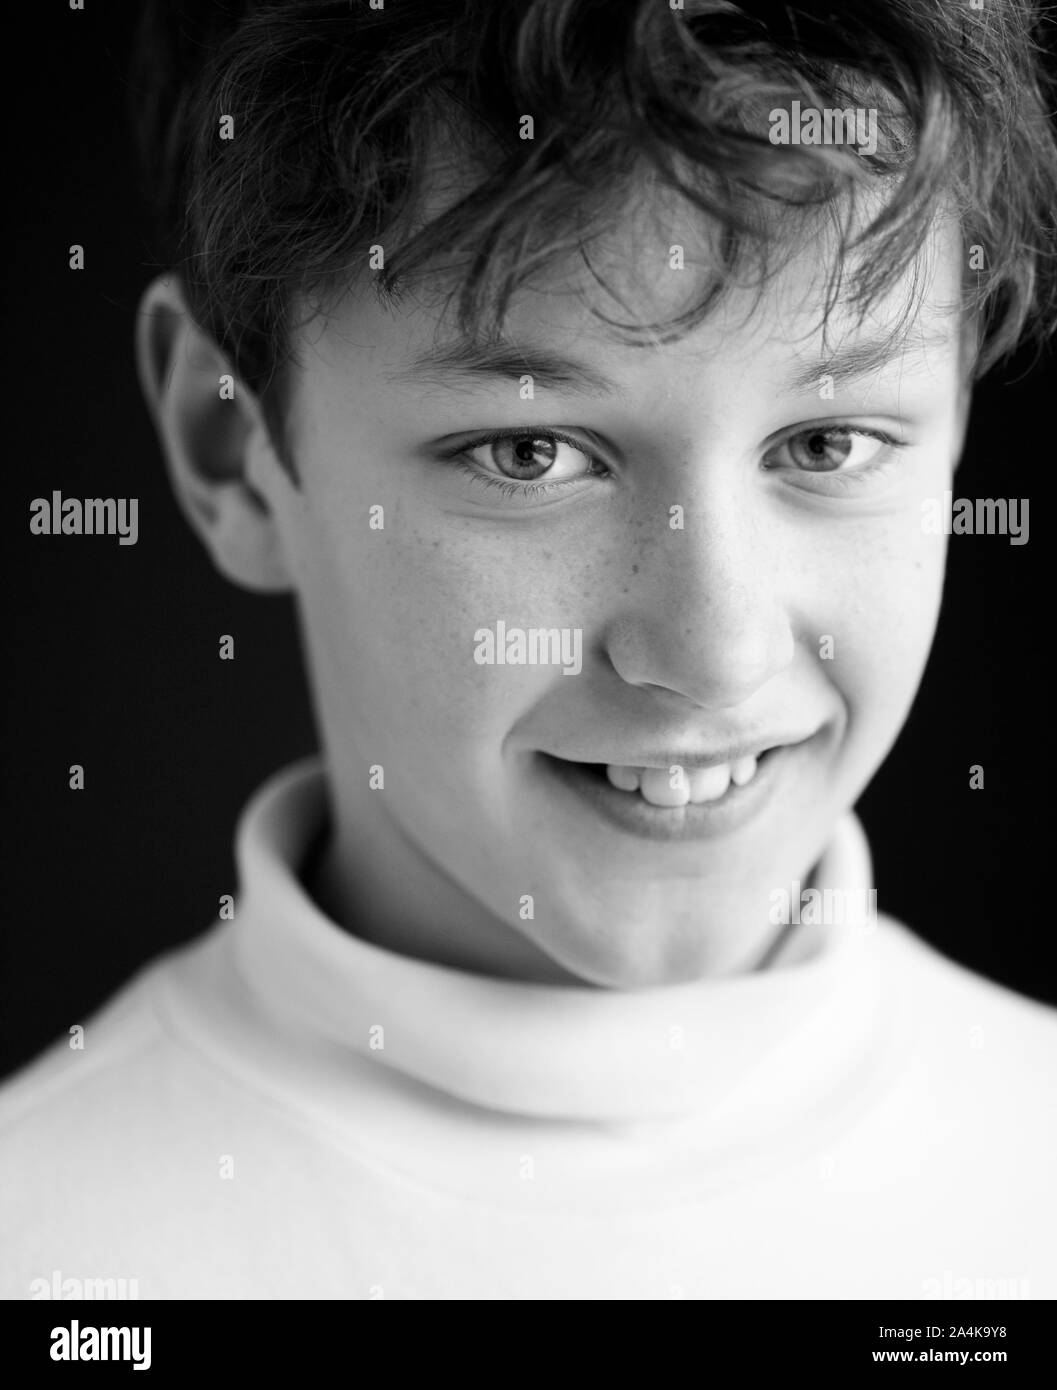 Portrait of young boy Stock Photo